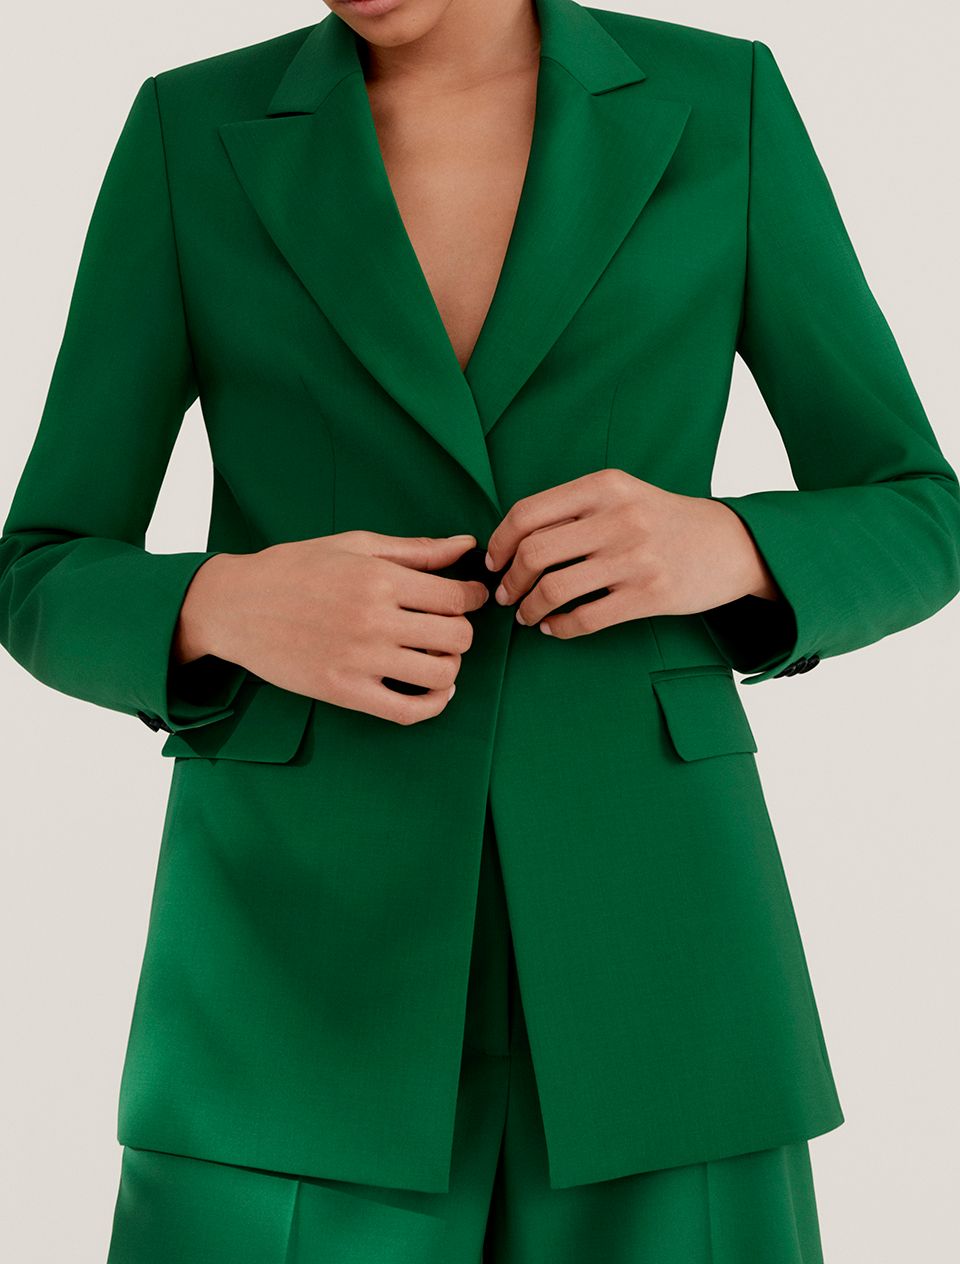 Woman in a green suit